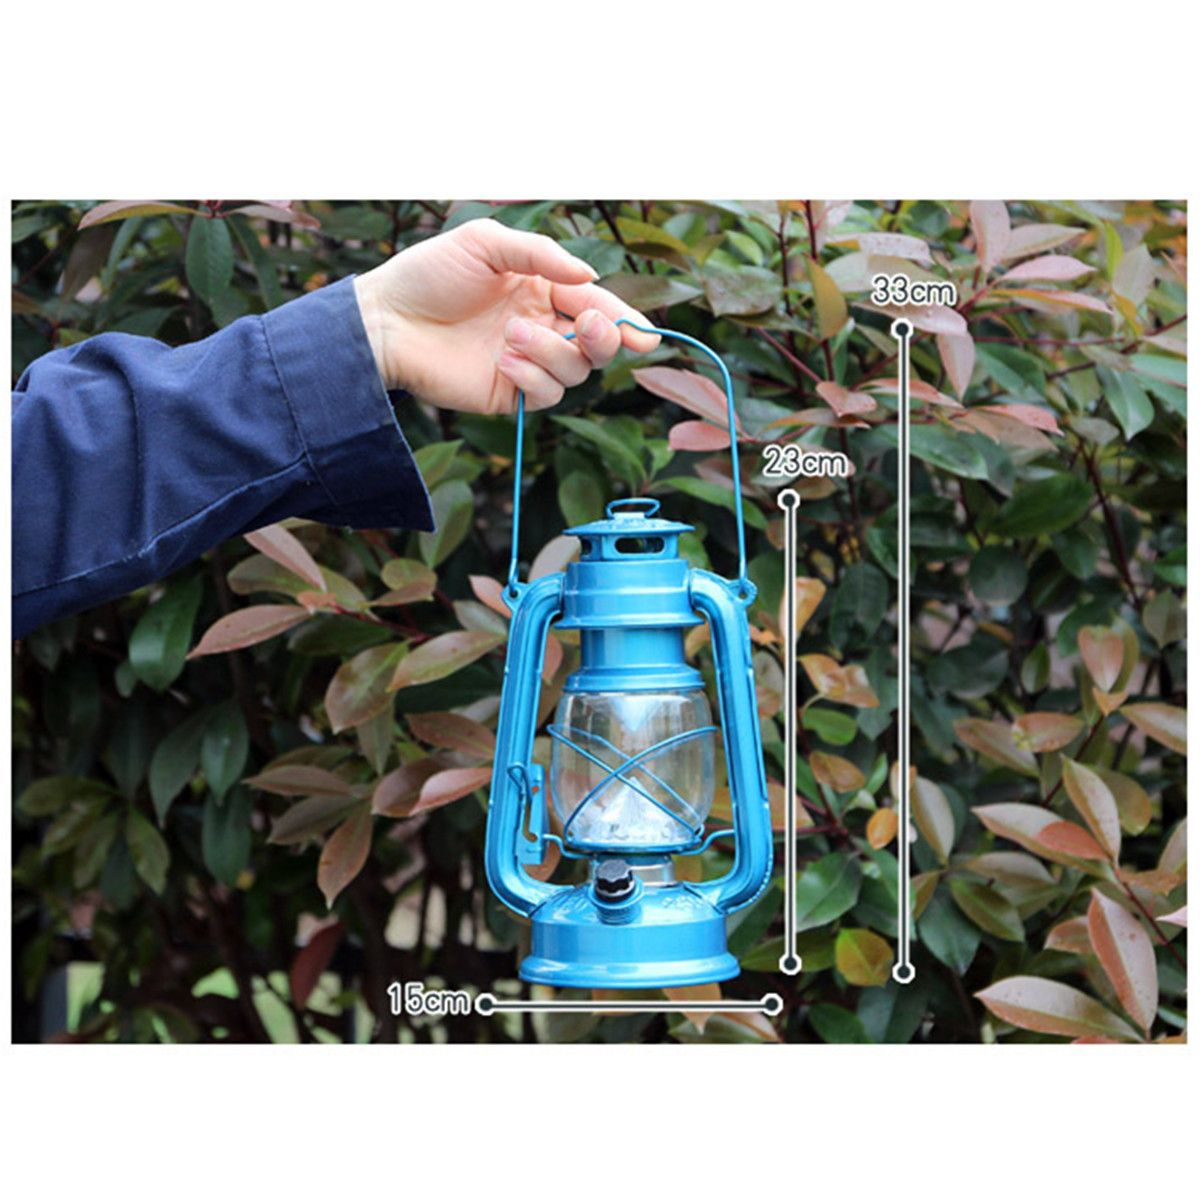 Vintage-Style-15-LED-Emergency-Light-Battery-Operated-Indoor-Outdoor-Camping-Fishing-Lantern-1223667-8